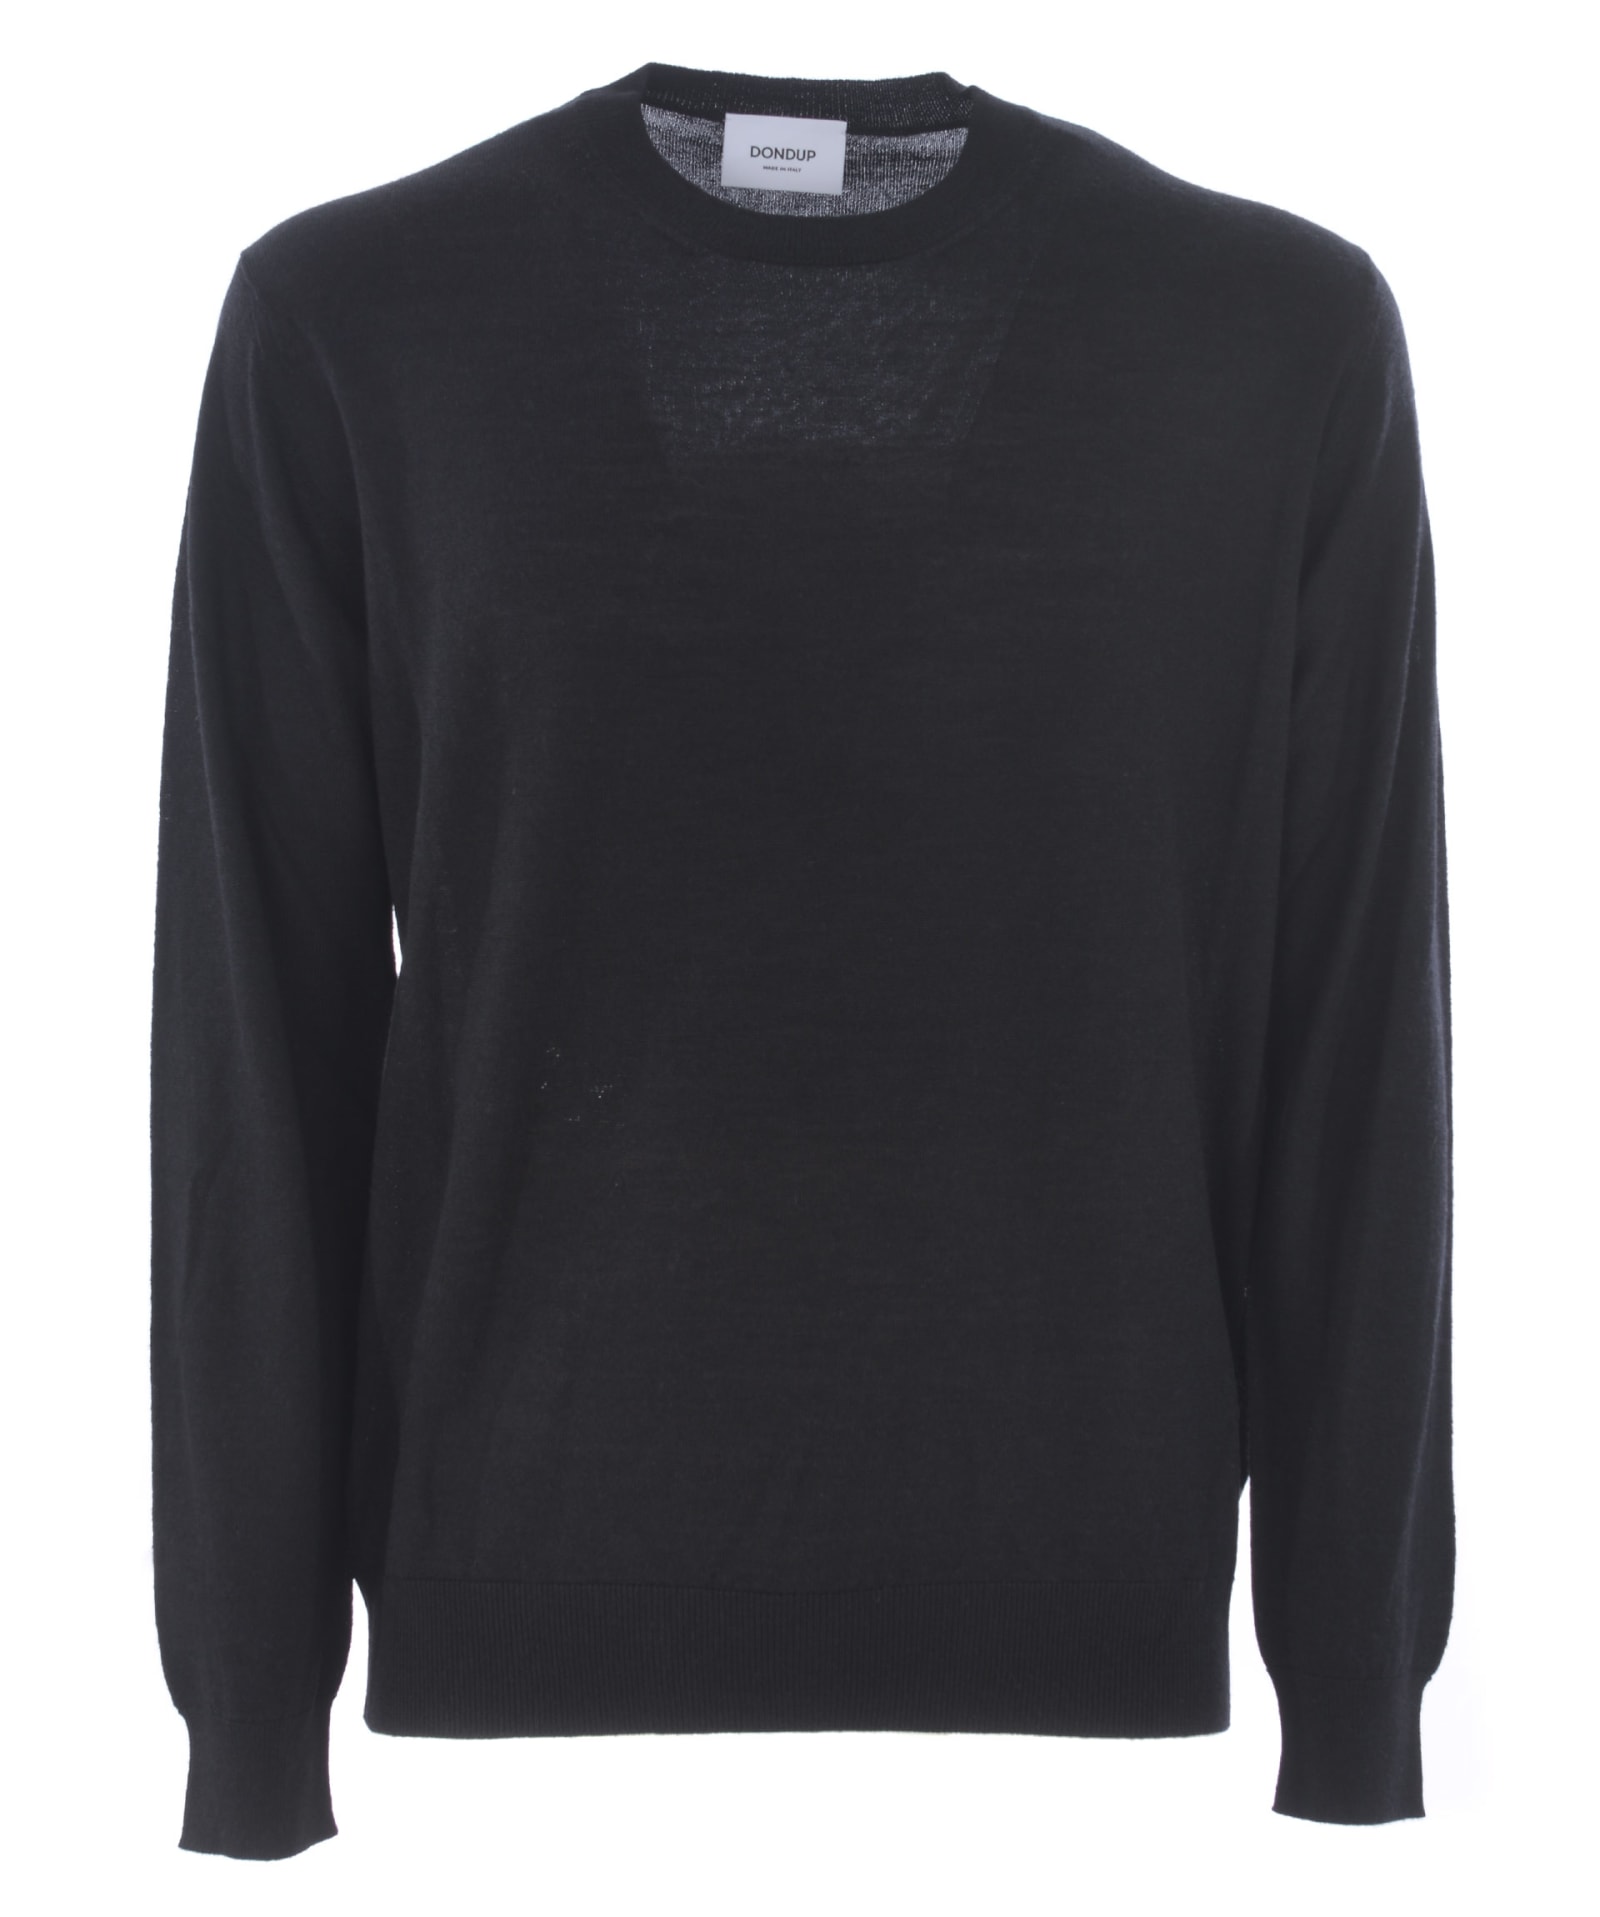 DONDUP DONDUP SWEATER IN BLACK WOOL AND CAMEL BLEND.,UM948M00655 002-999